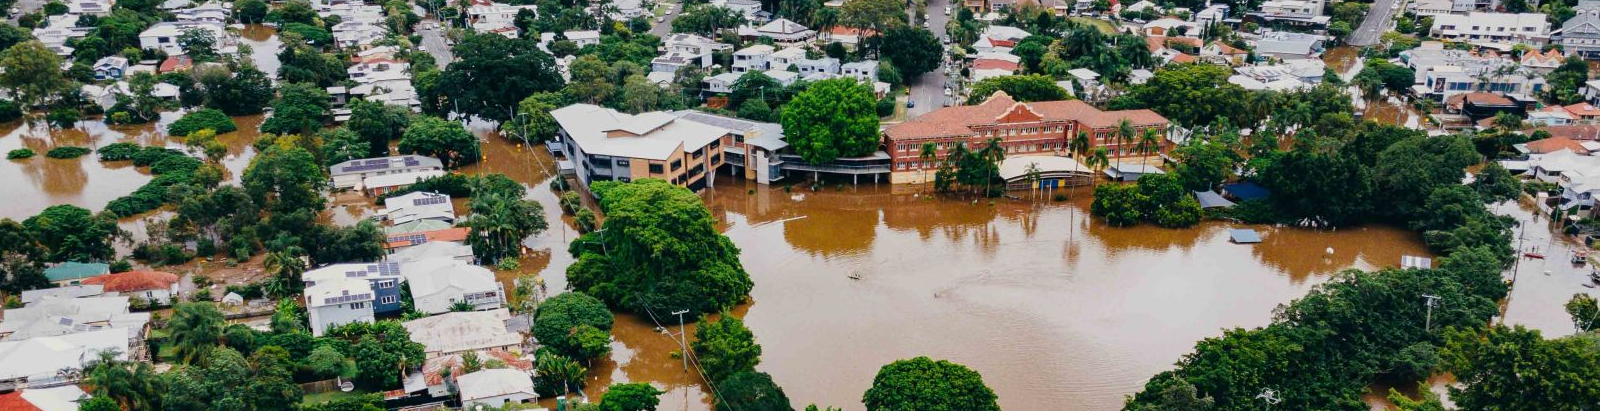 Aerial view of flooded suburb